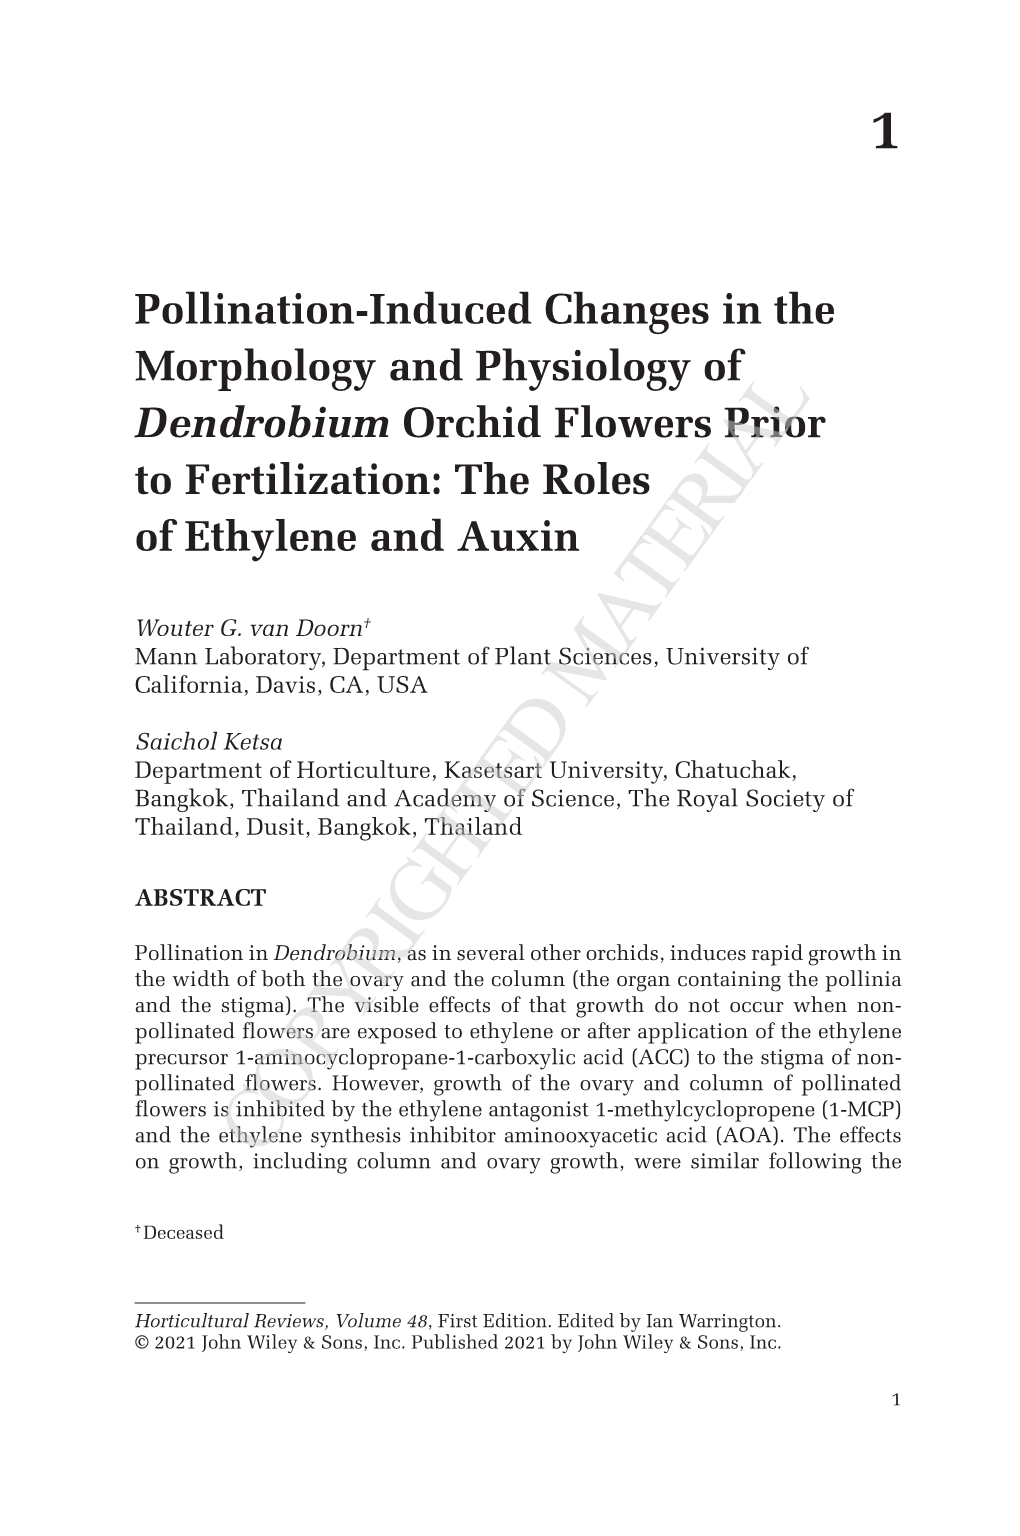 Chapter 1: Pollination-Induced Changes in the Morphology and Physiology of ﻿Dendrobium﻿ Orchid Flowers Prior to Fertilizat